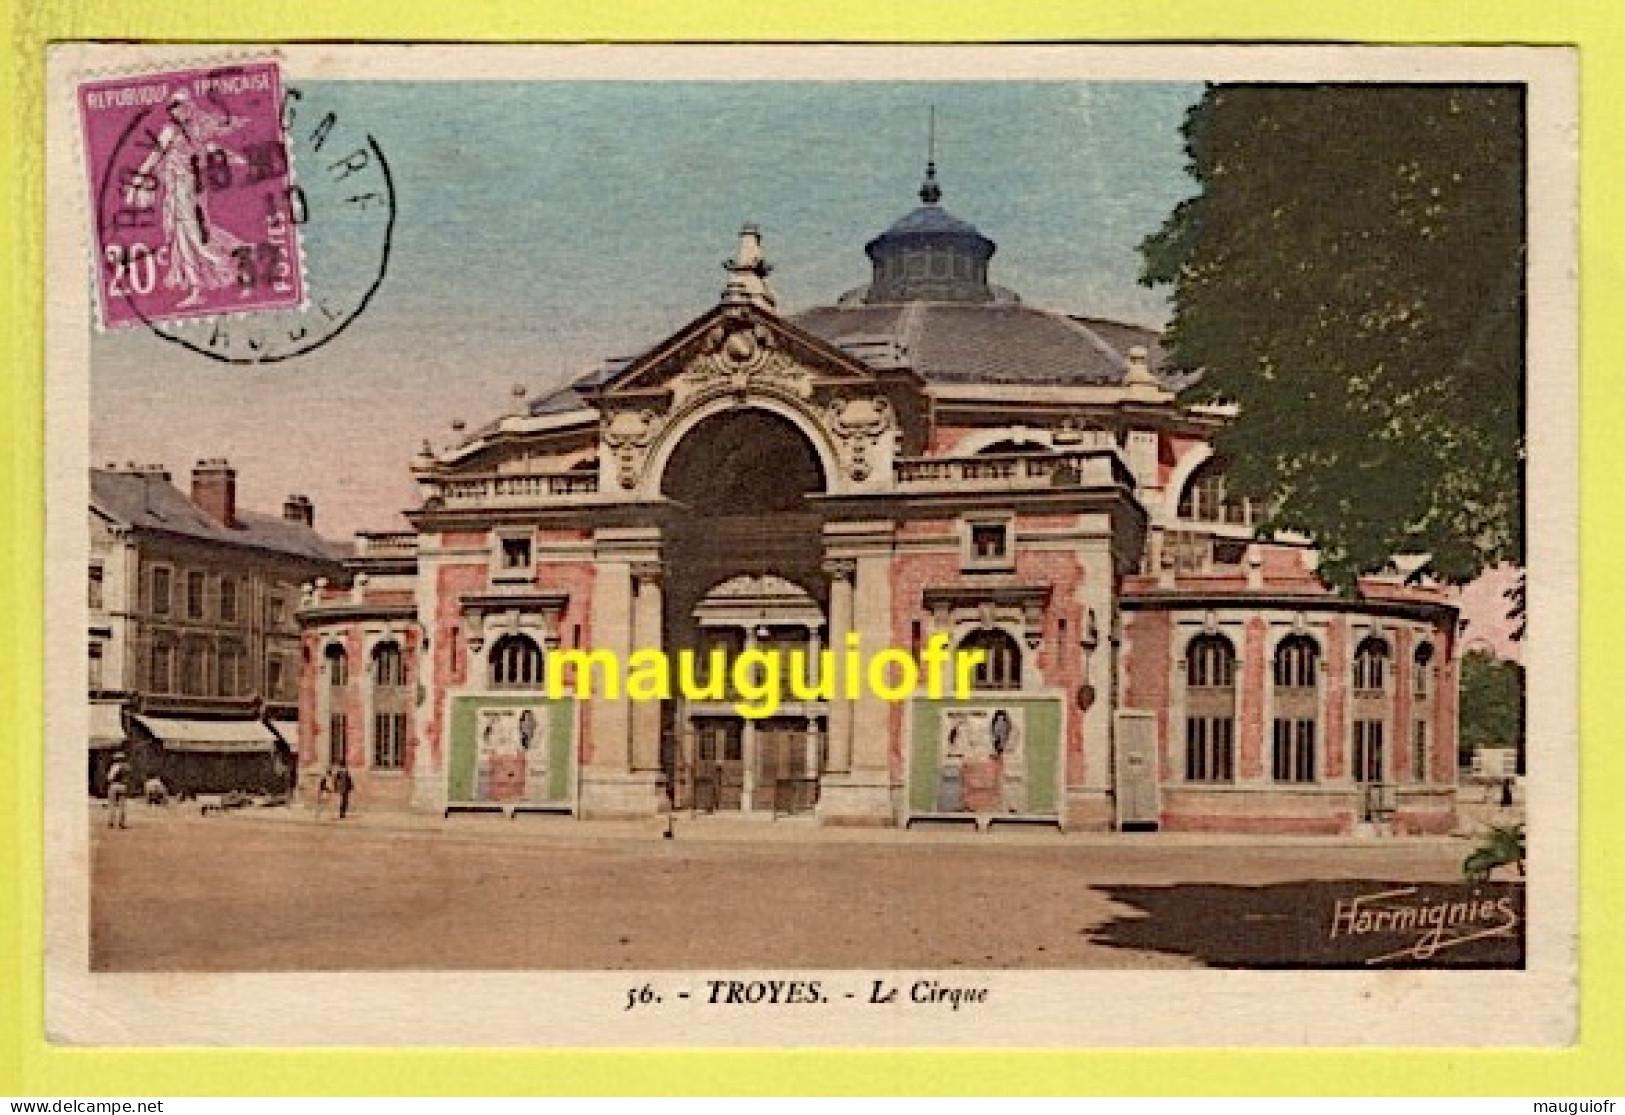 10 AUBE / TROYES / LE CIRQUE / 1932 - Troyes